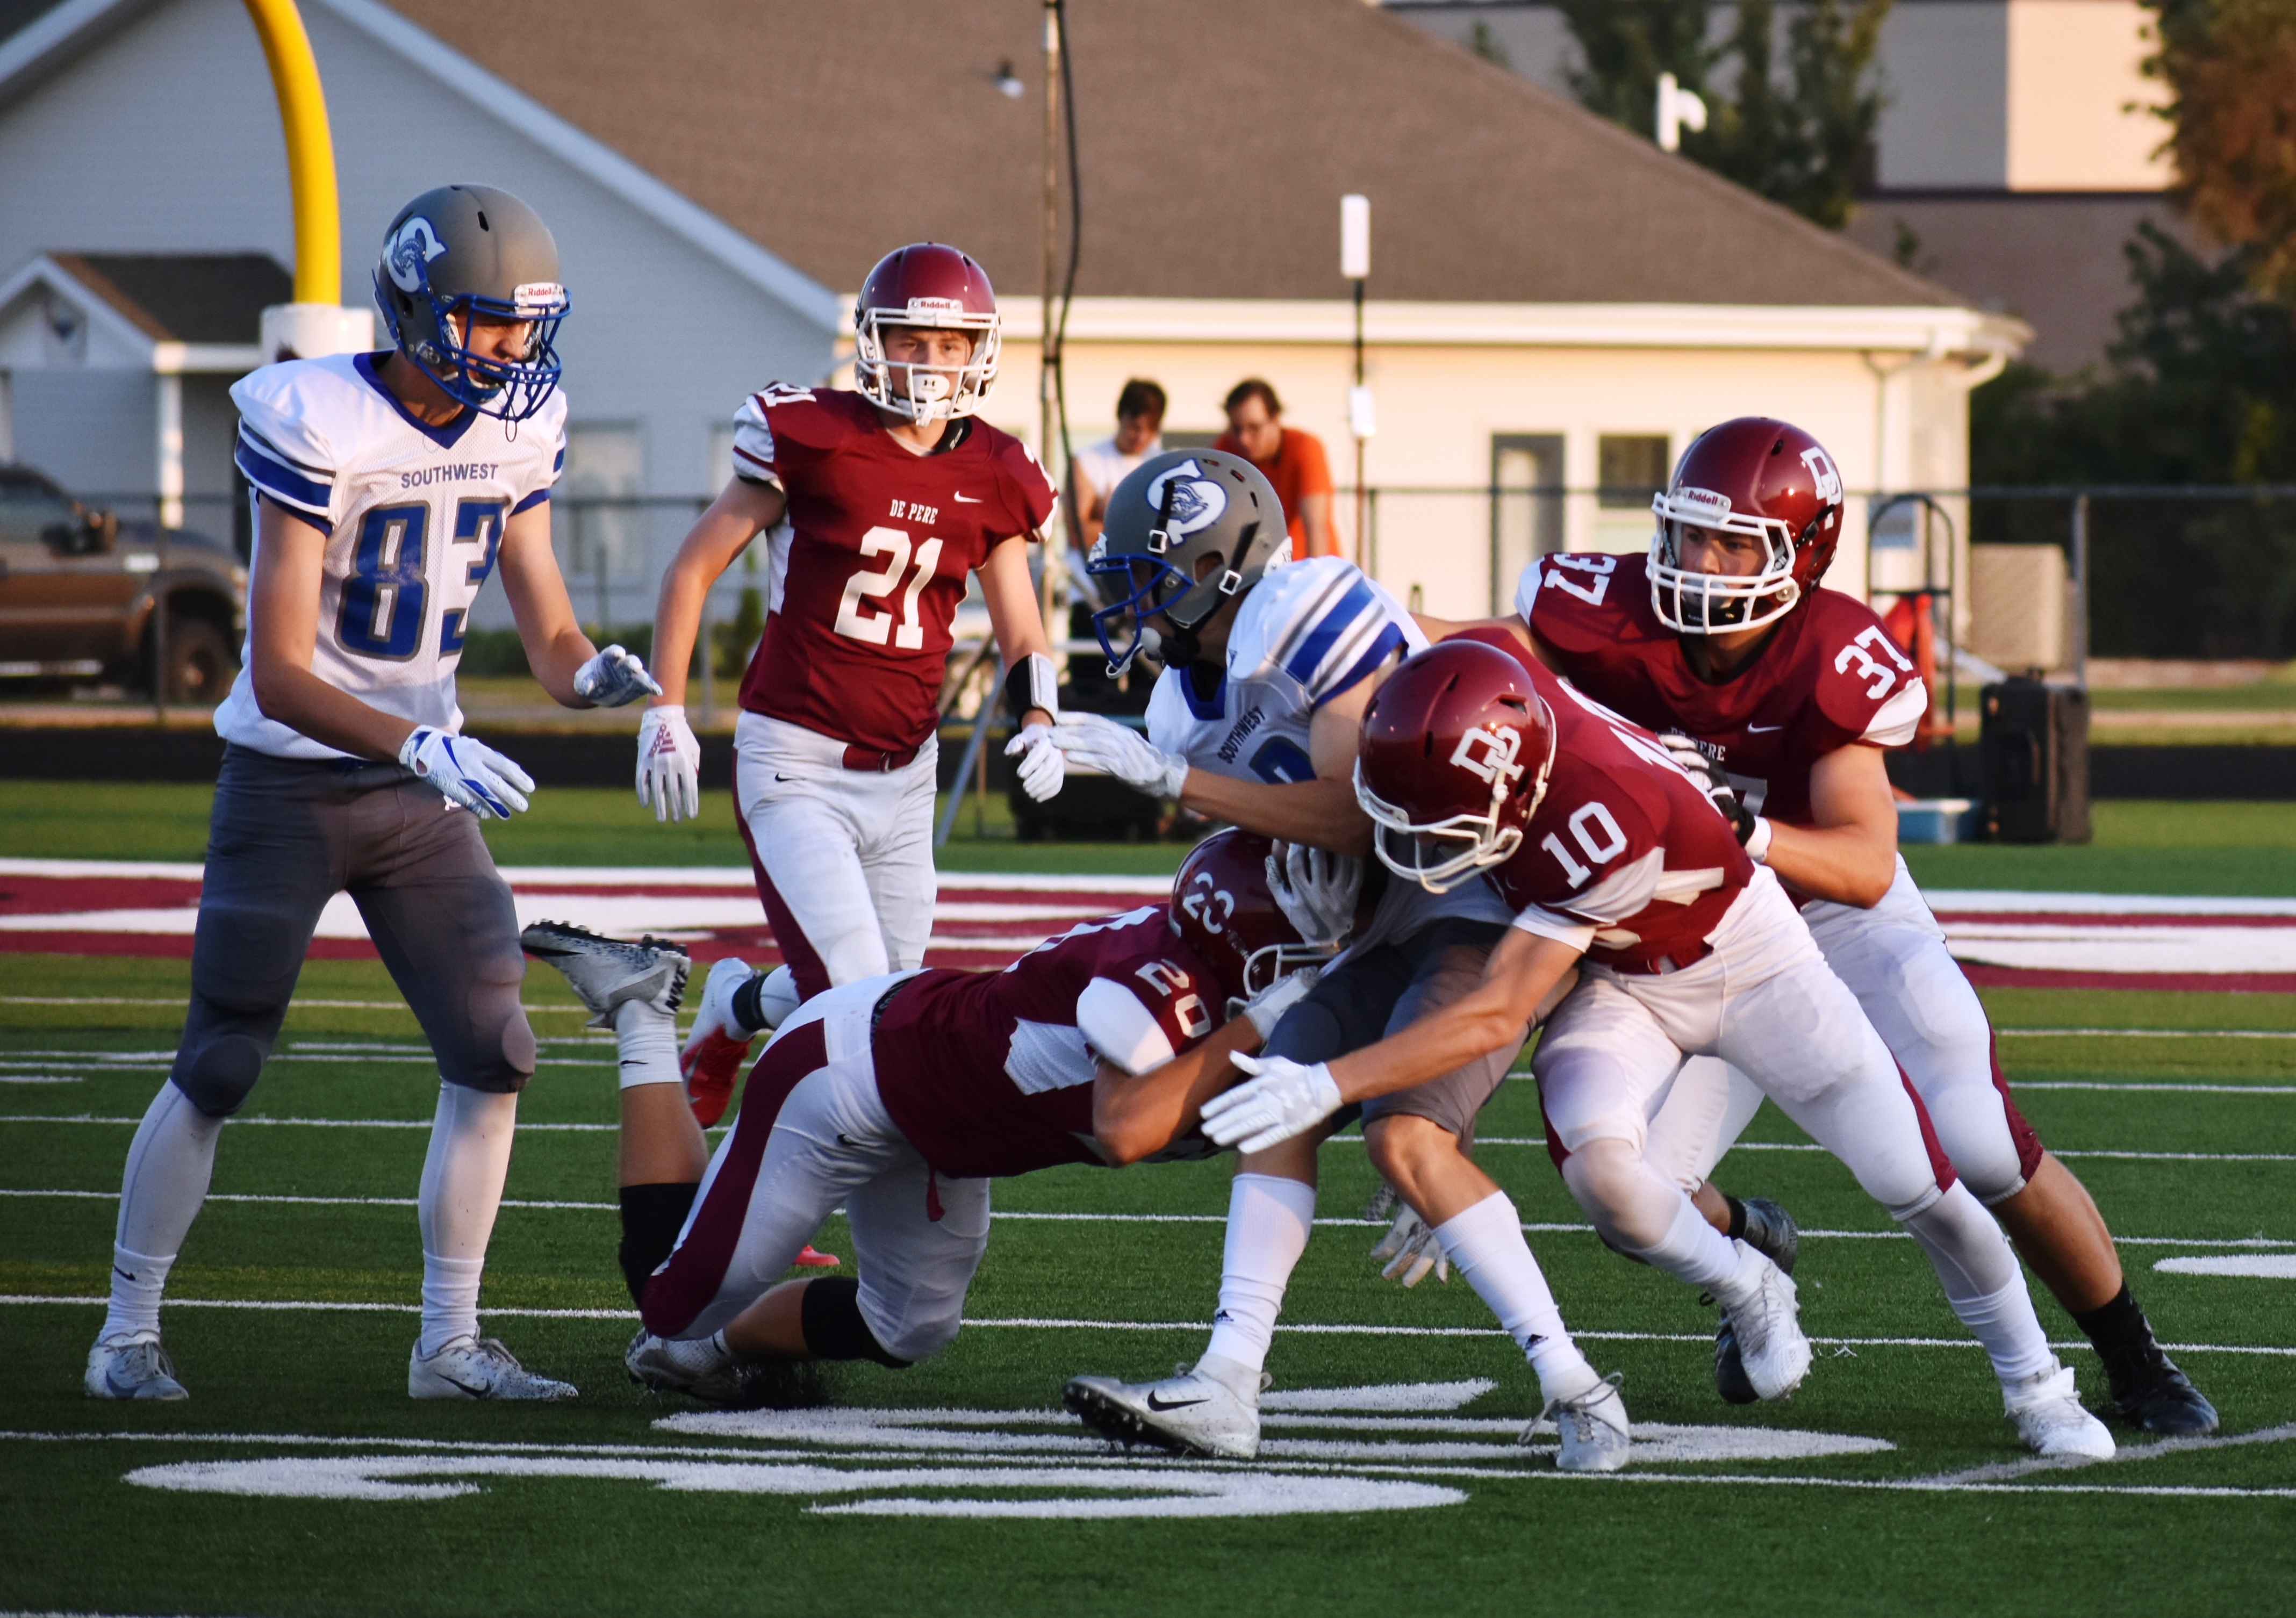 De Pere stuns Southwest with late rally; Bay Port rolls again